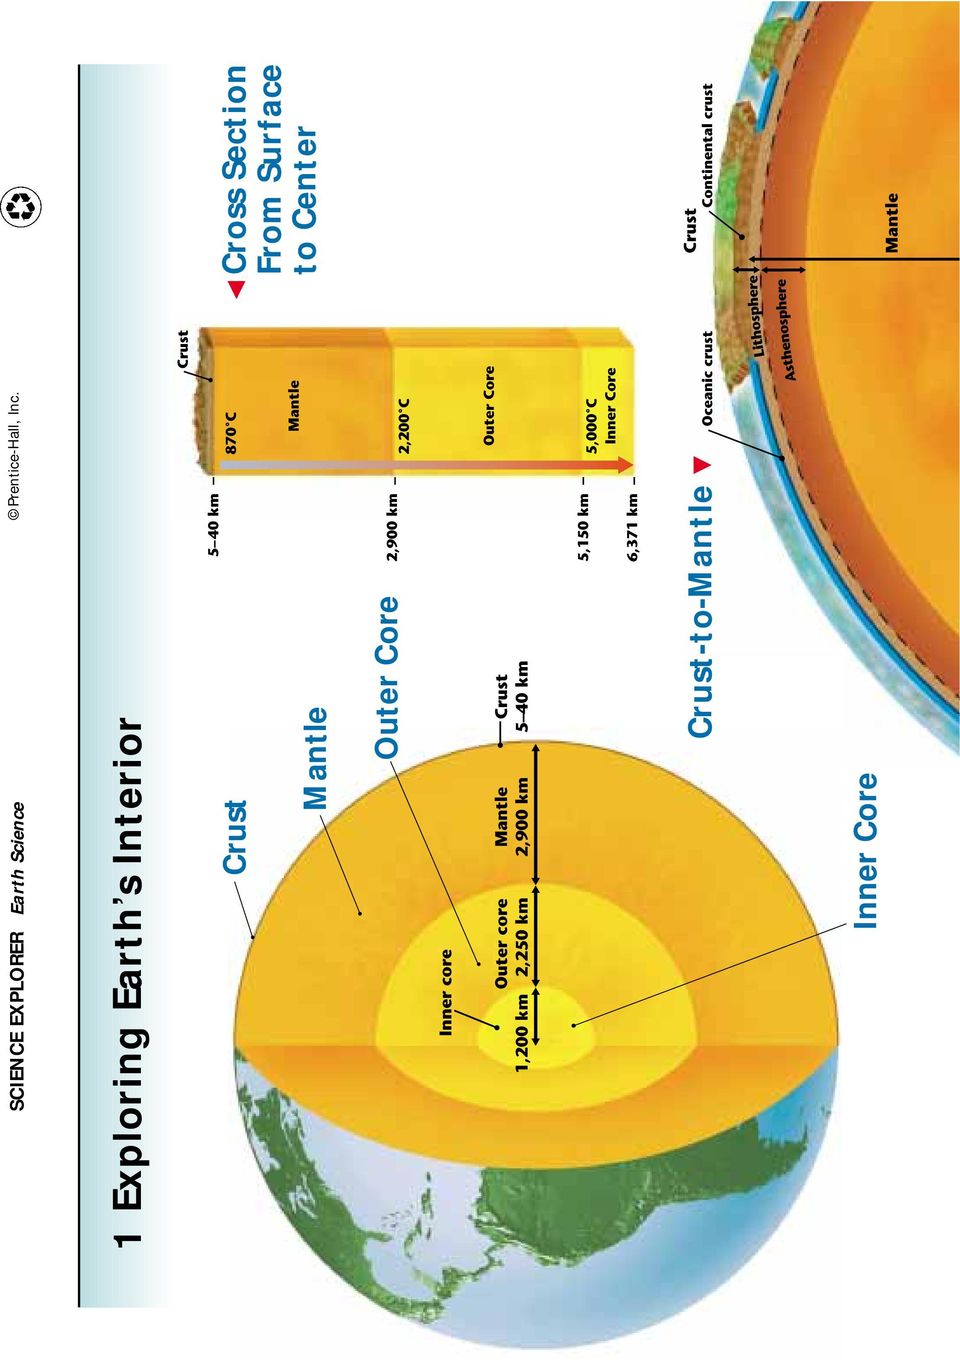 Crust-to-Mantle Inner Core